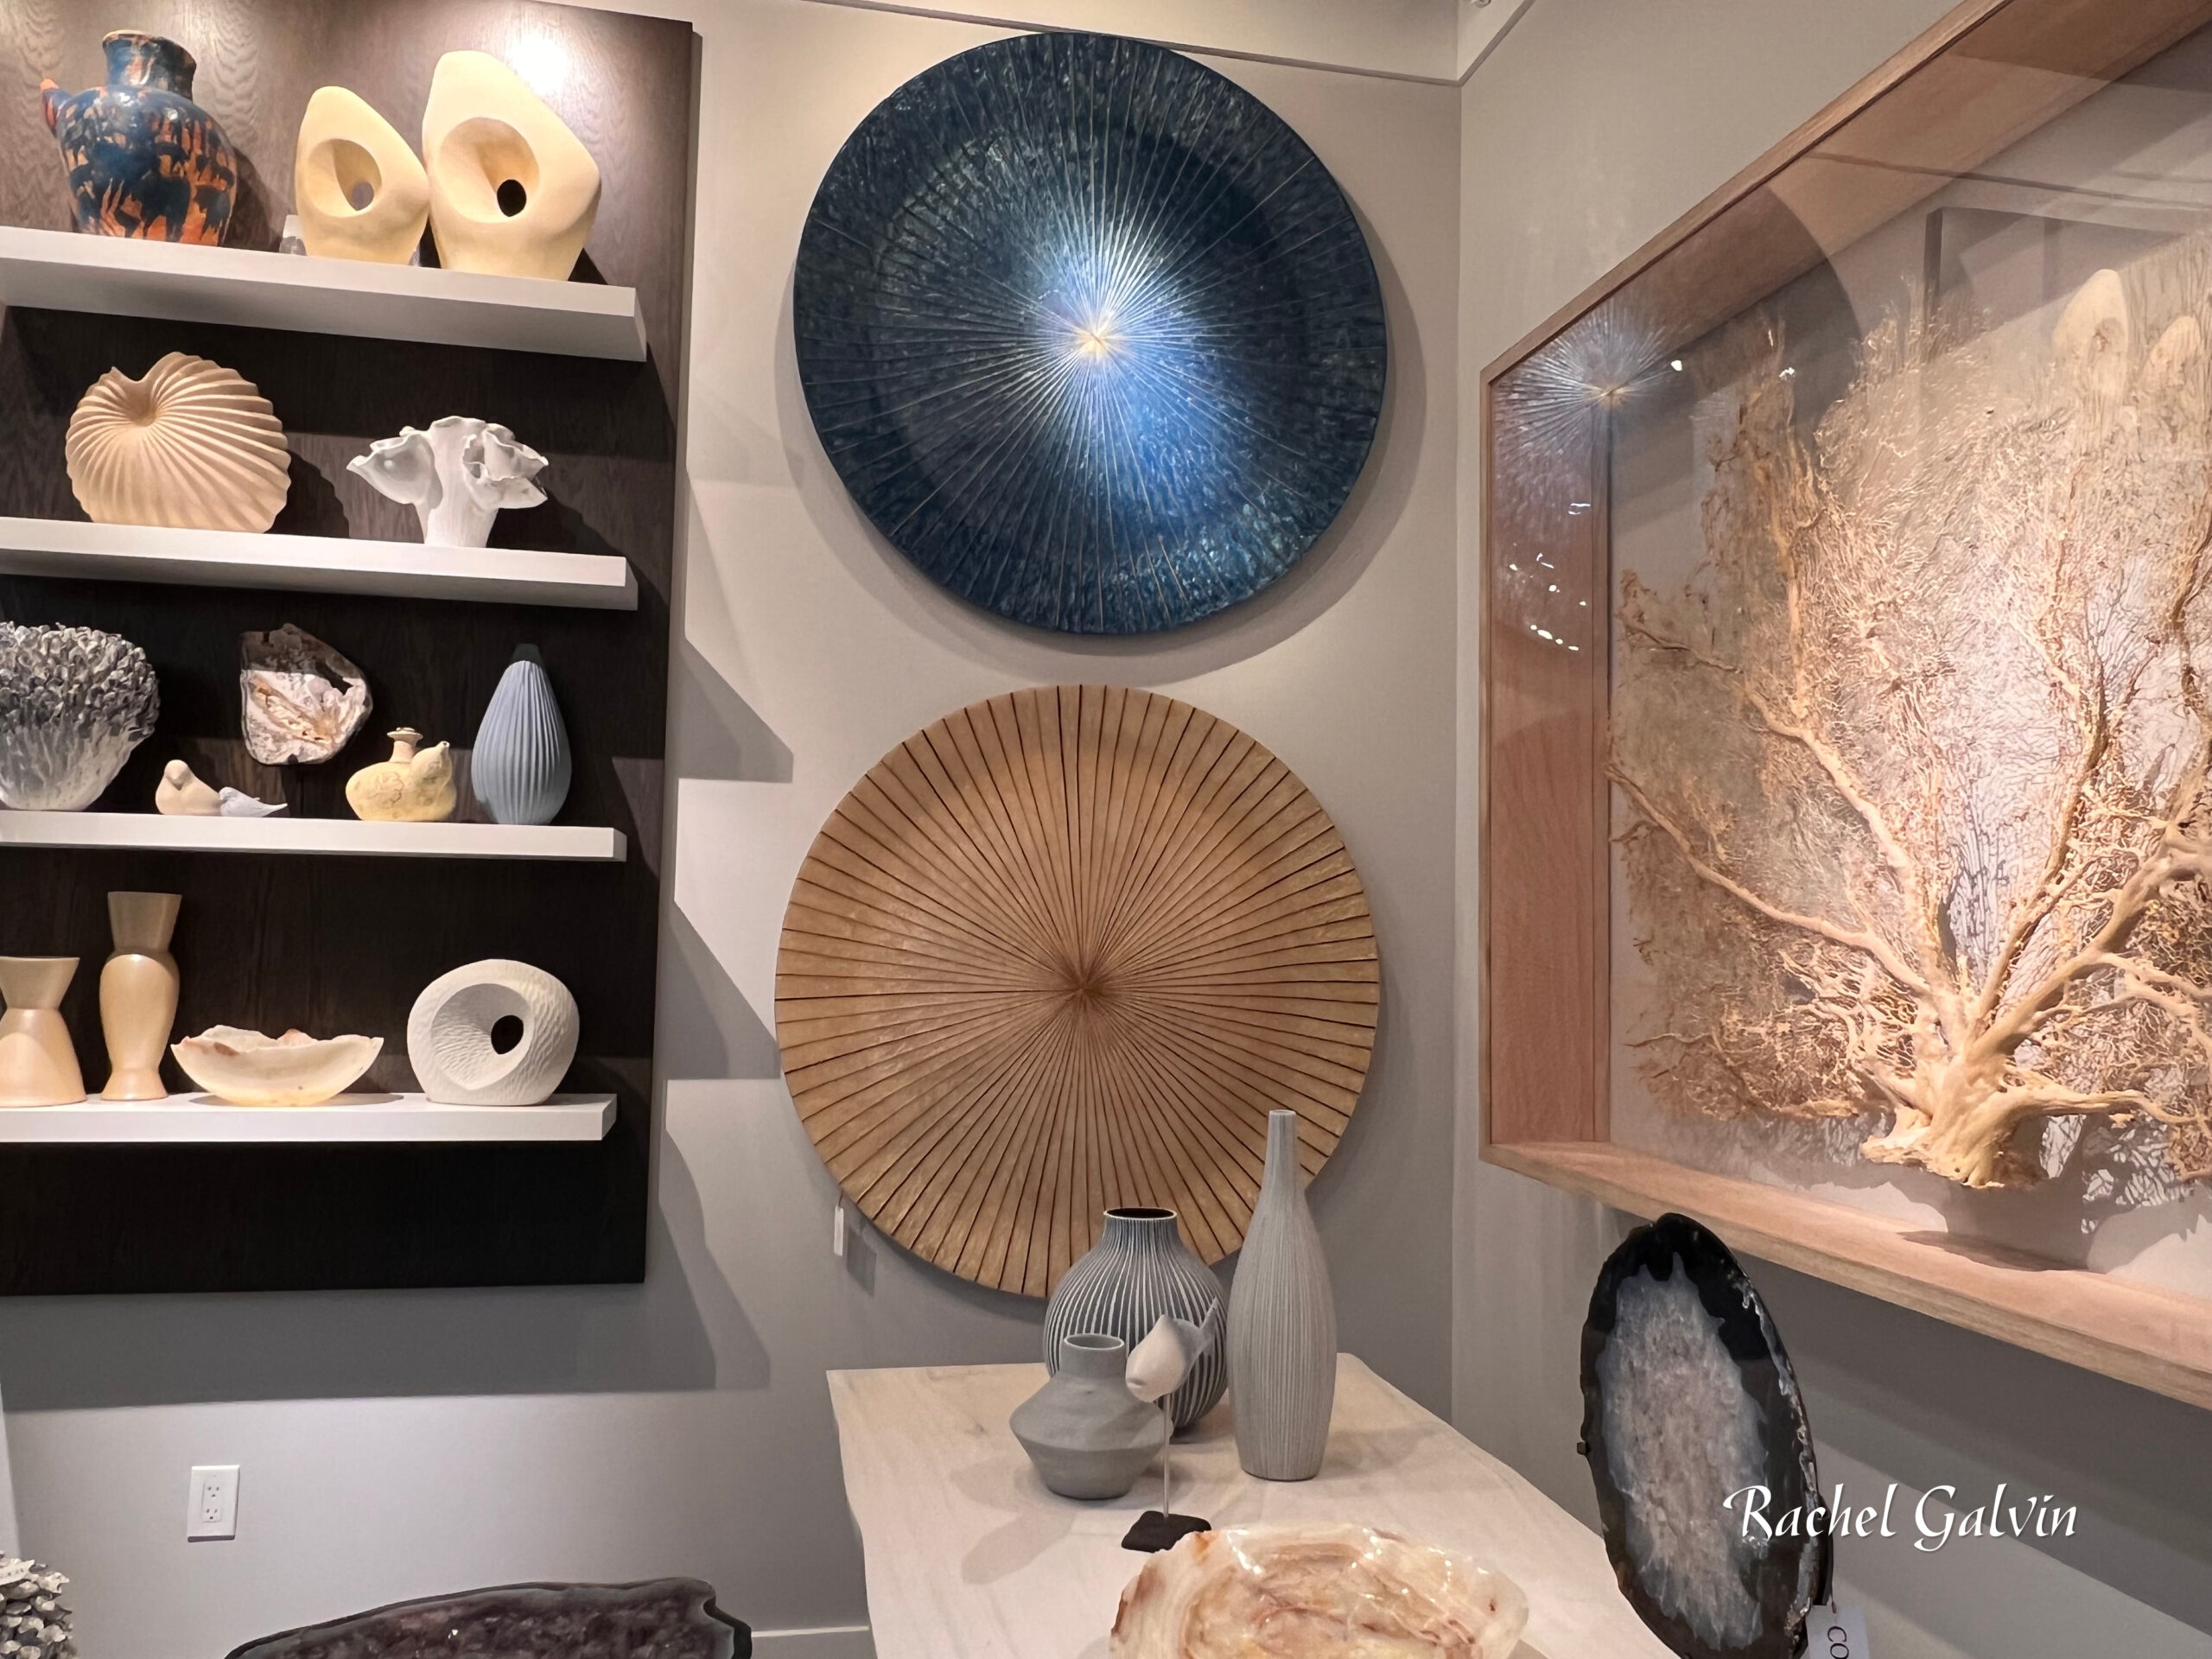 Cocoon Gallery’s Organic Furnishings & Decor Celebrate Natural Beauty